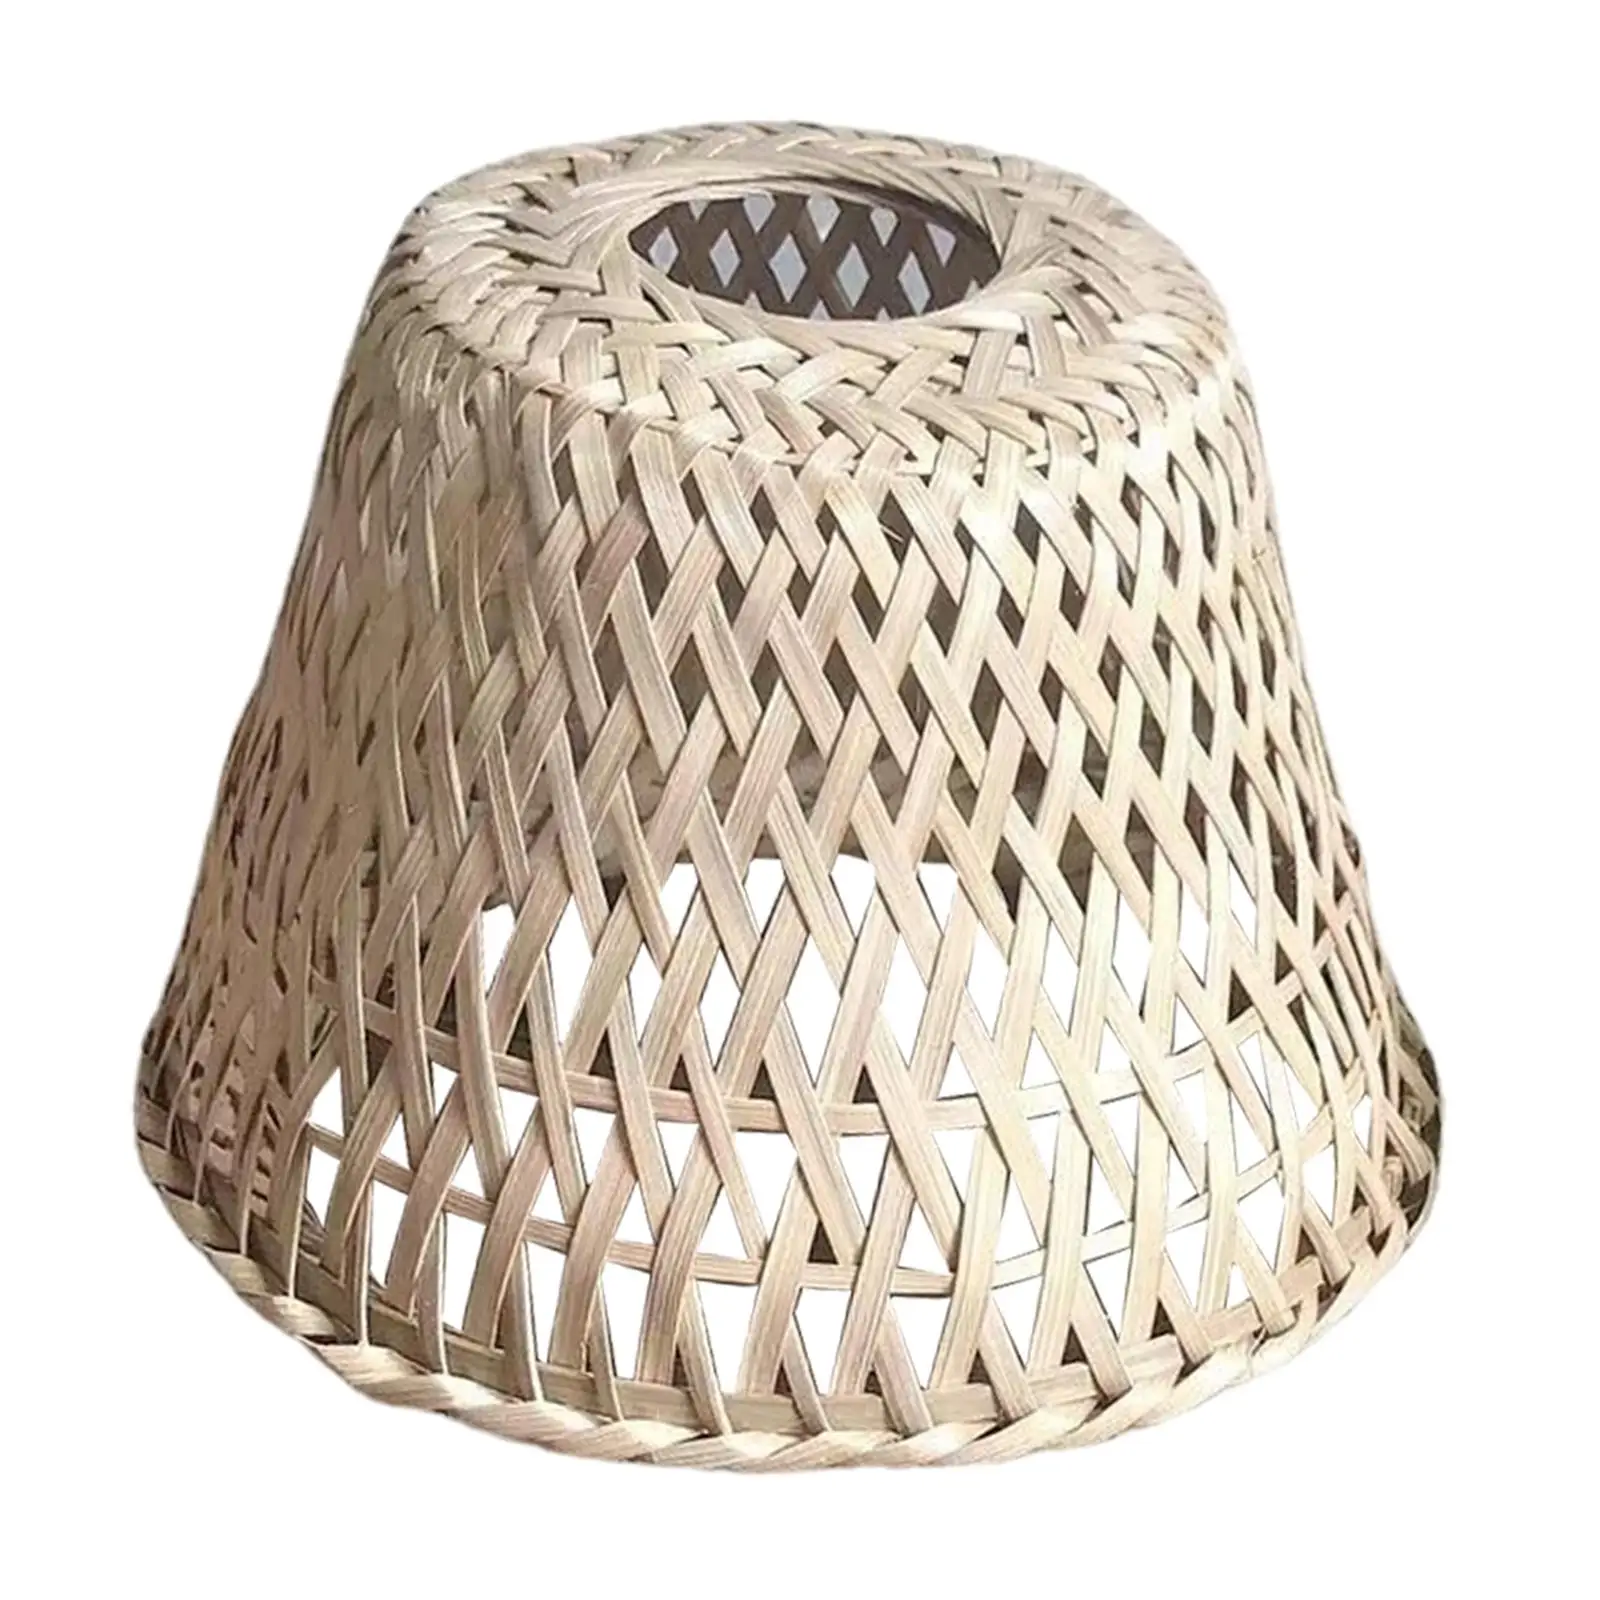 Retro Style Woven Bamboo Pendant Light Shade Chandelier Cover Dust Proof Premium Material